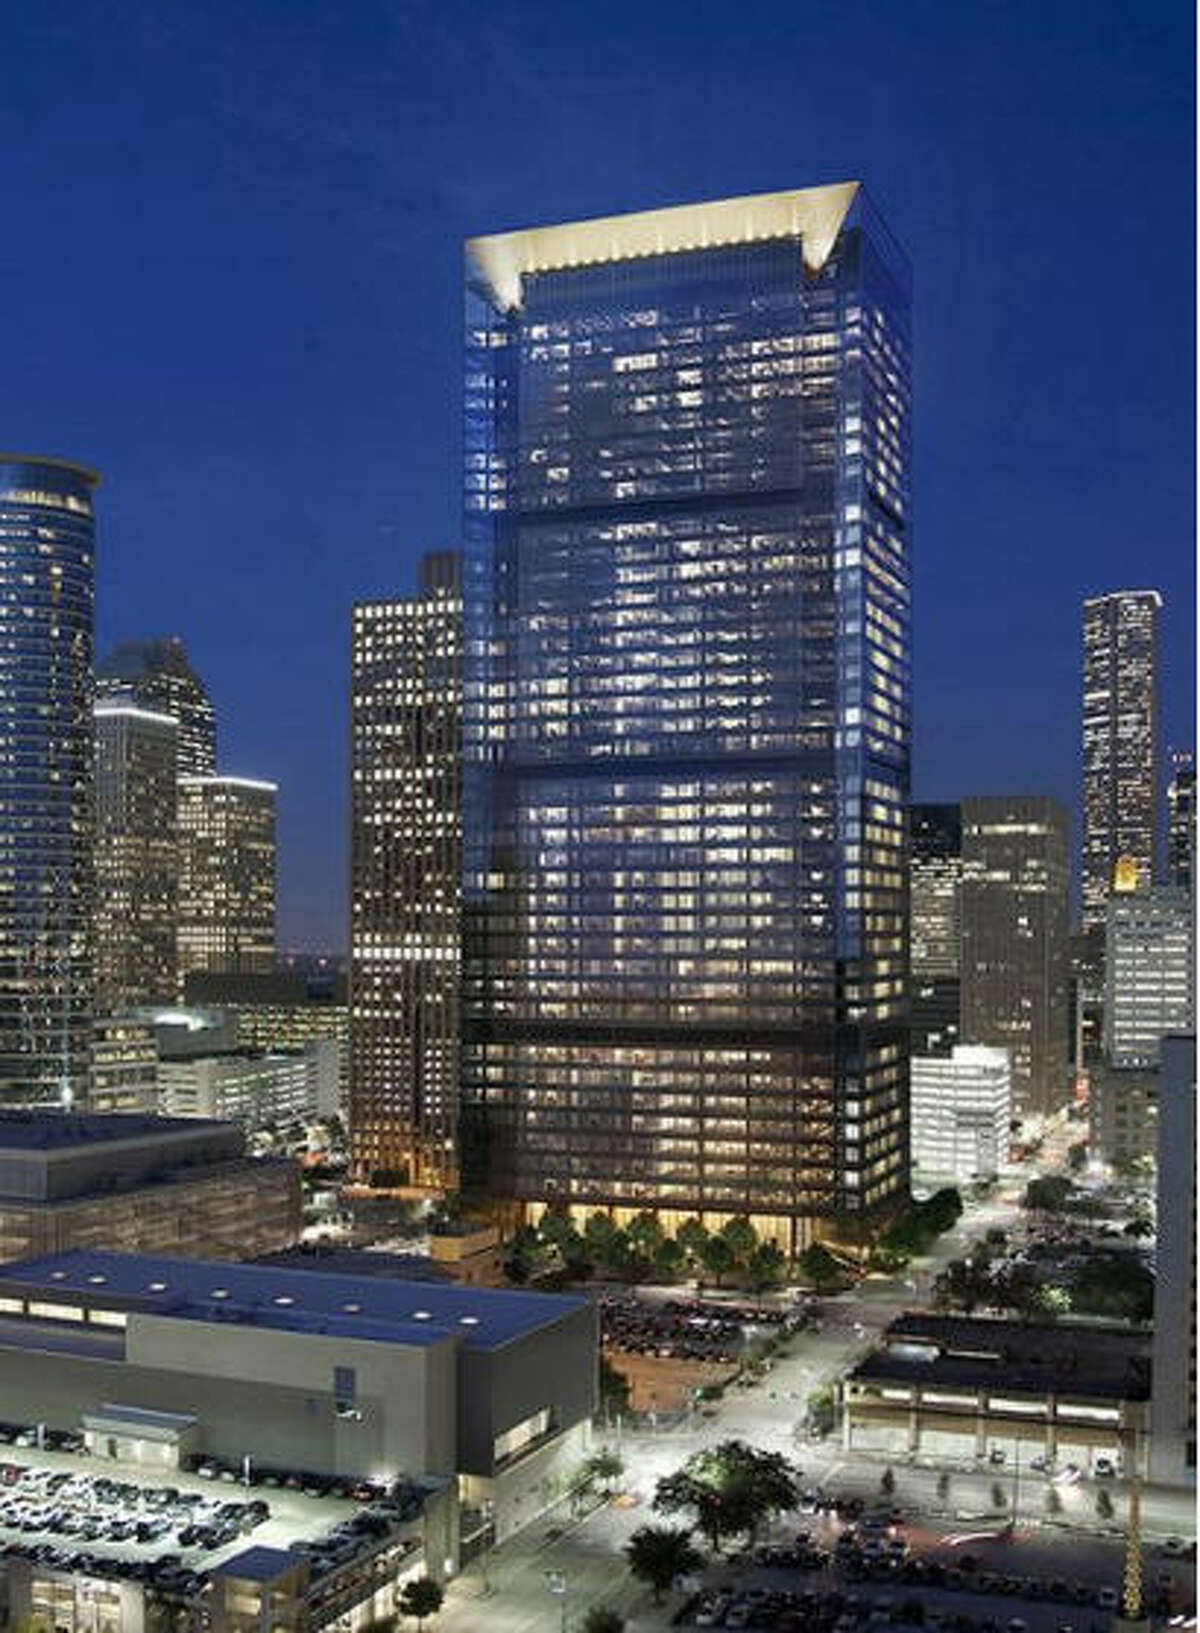 800 Bell: Shorenstien Properties purchased this tower now occupied by Exxon Mobil, but when the oil giant moves to its new campus in The Woodlands next year, the real estate firm plans a major renovation.